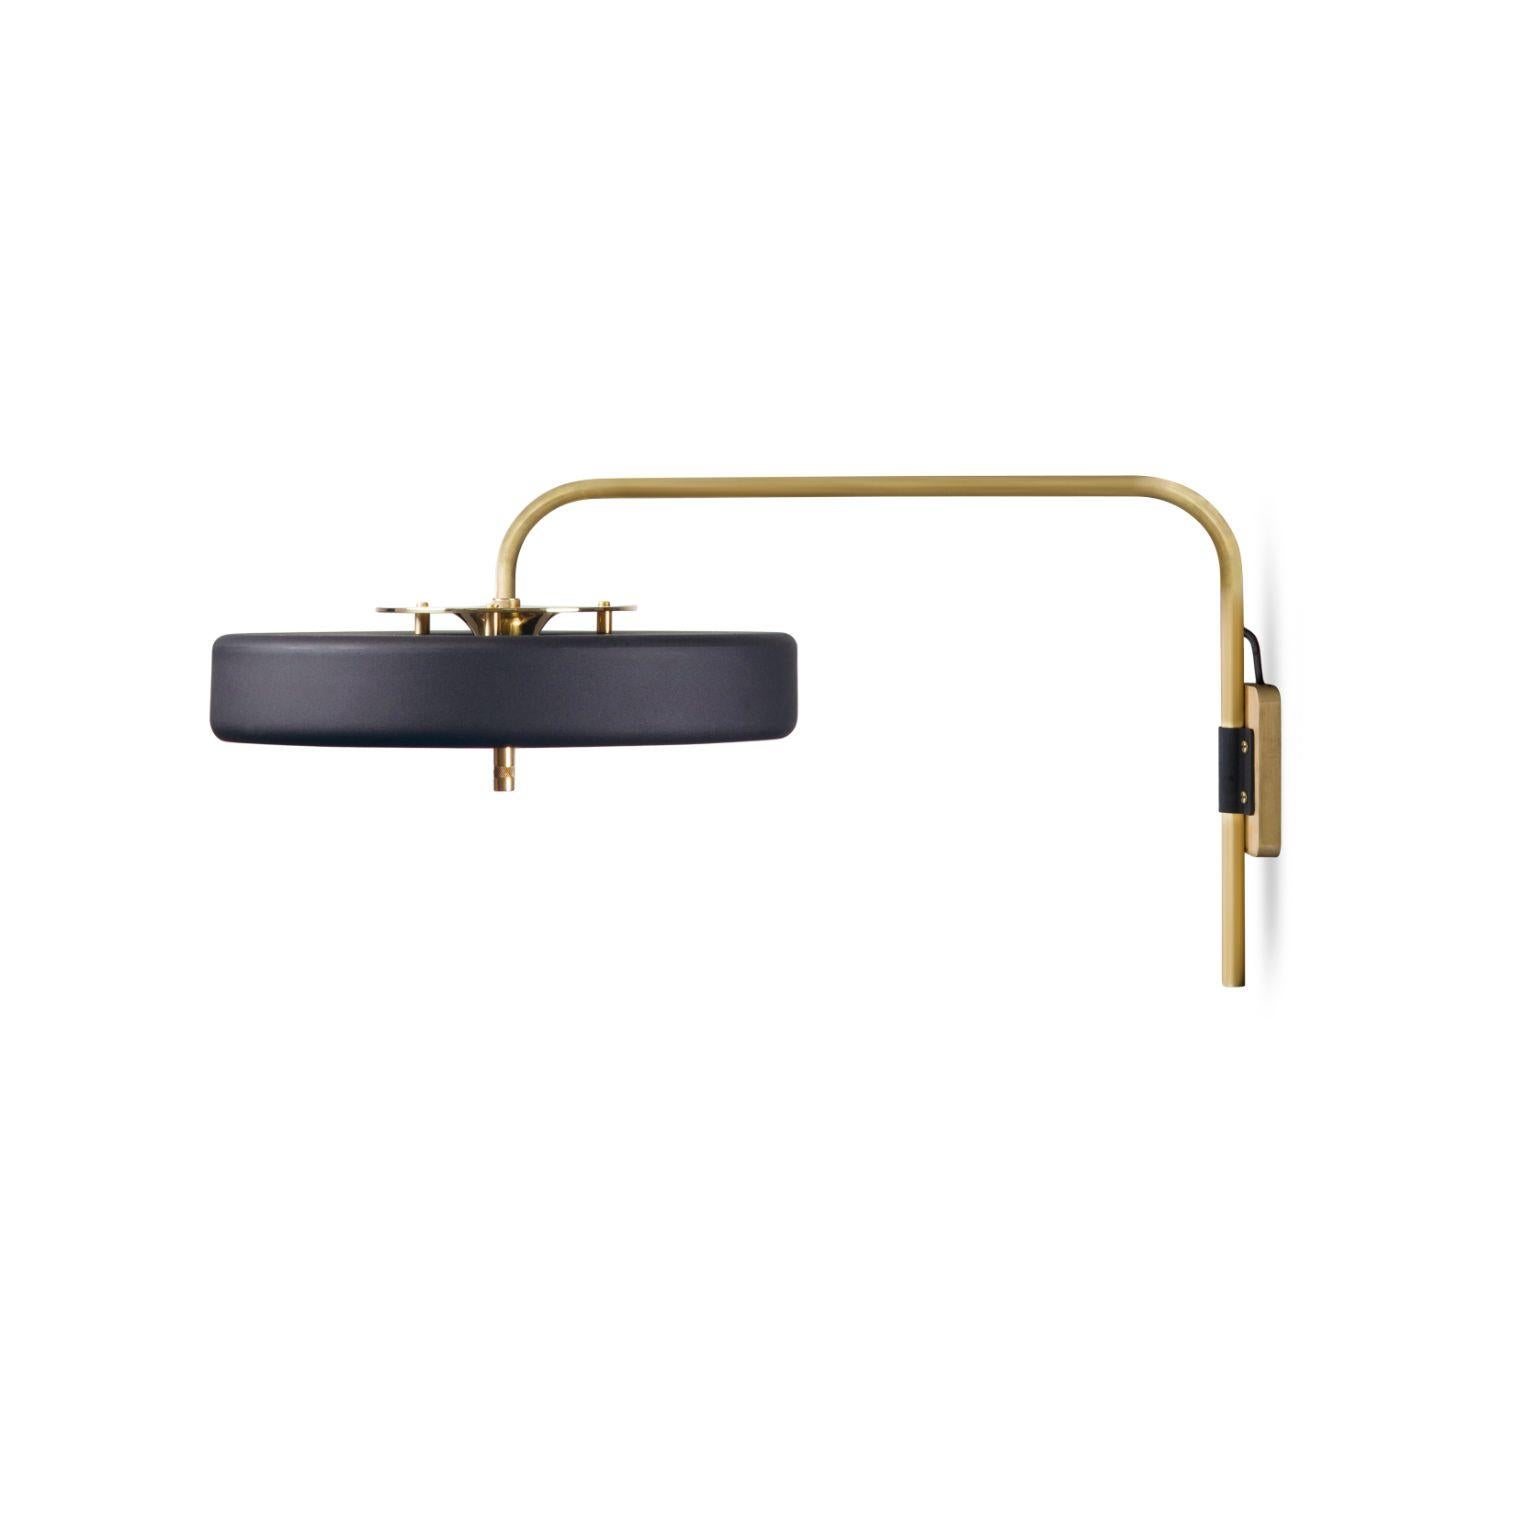 Revolve wall light - polished brass - black by Bert Frank
Dimensions: 31 x 63 x 35 cm
Materials: Brass, steel

Available in brushed brass

Flush-fitting opal glass shade with central dome of polished marble – white Carrara or green Guatemala – held